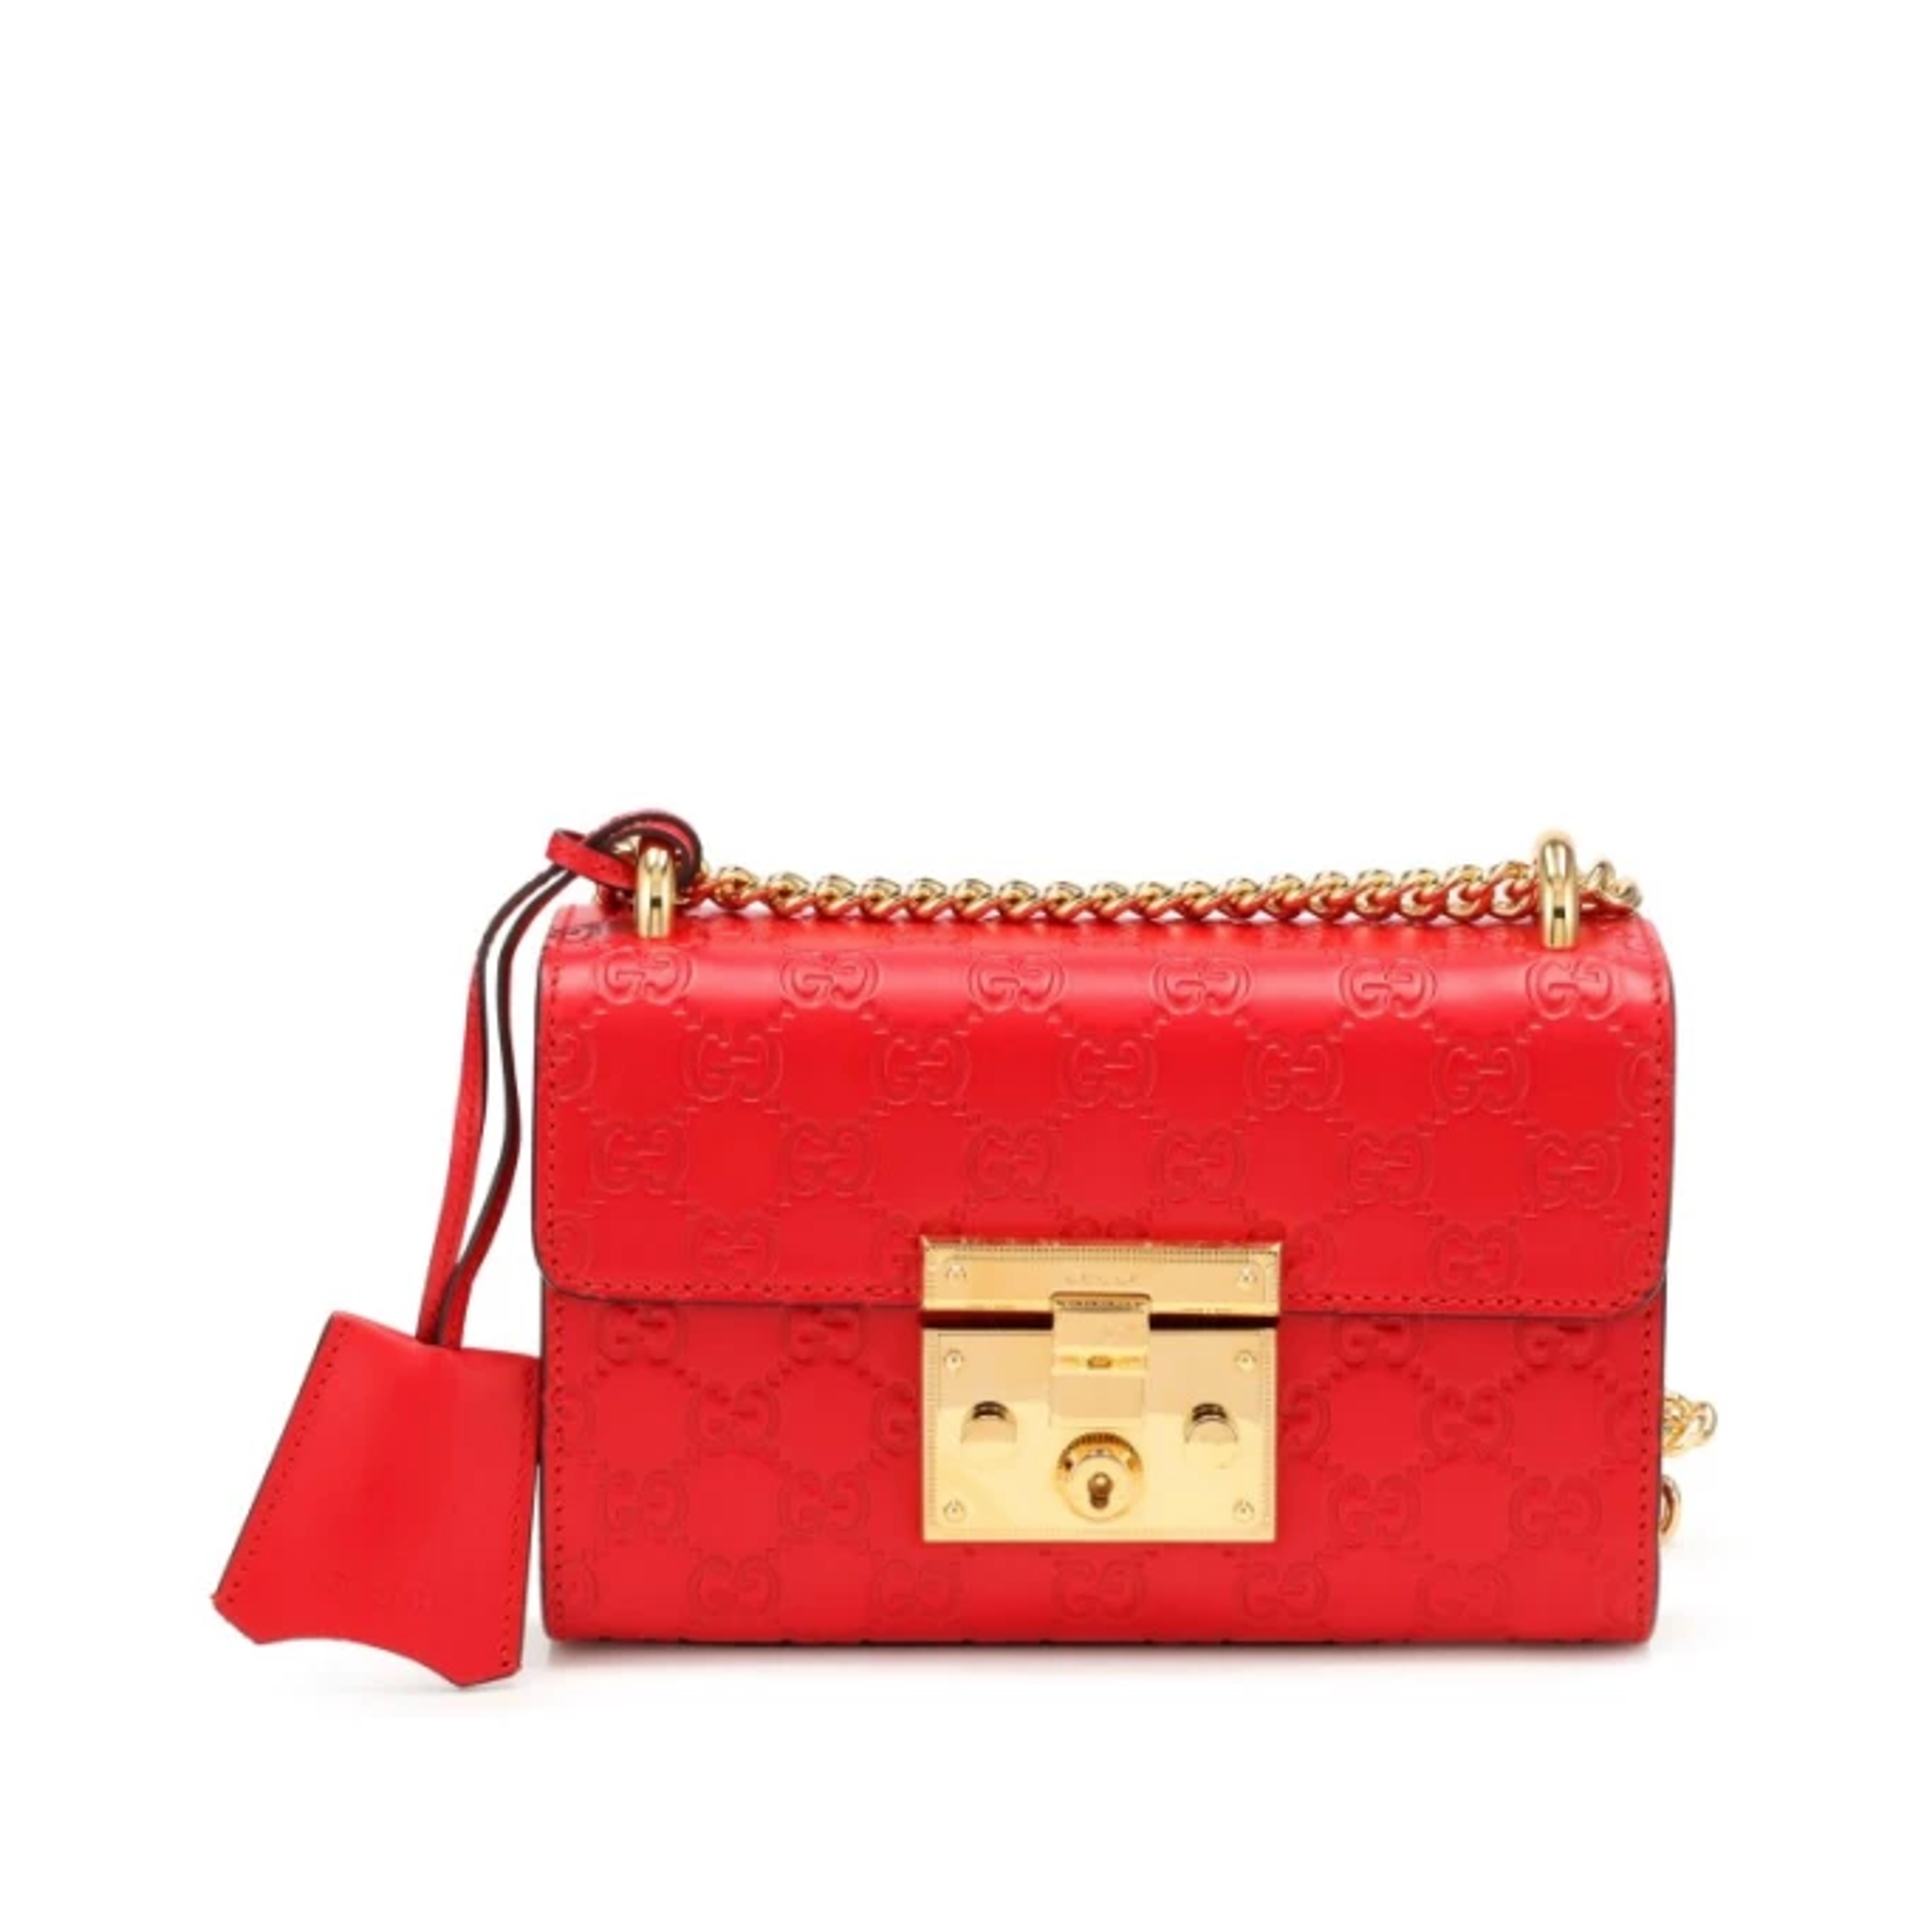 Small, red Gucci handbag with gold hardware